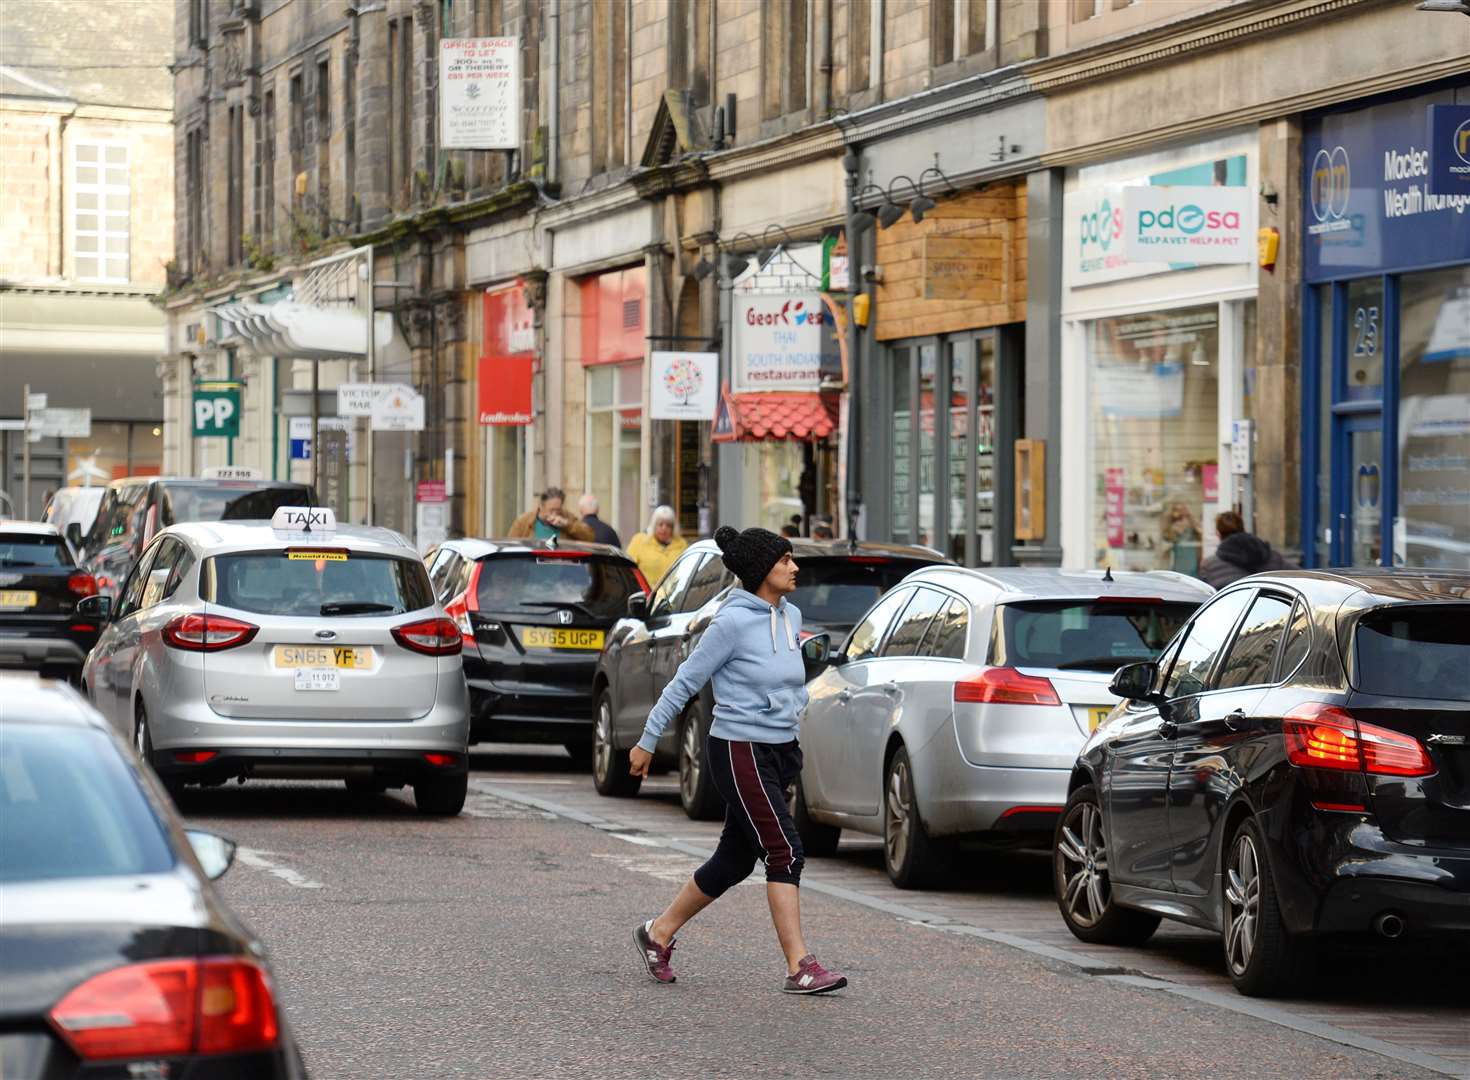 Could cars be banned from Queensgate?